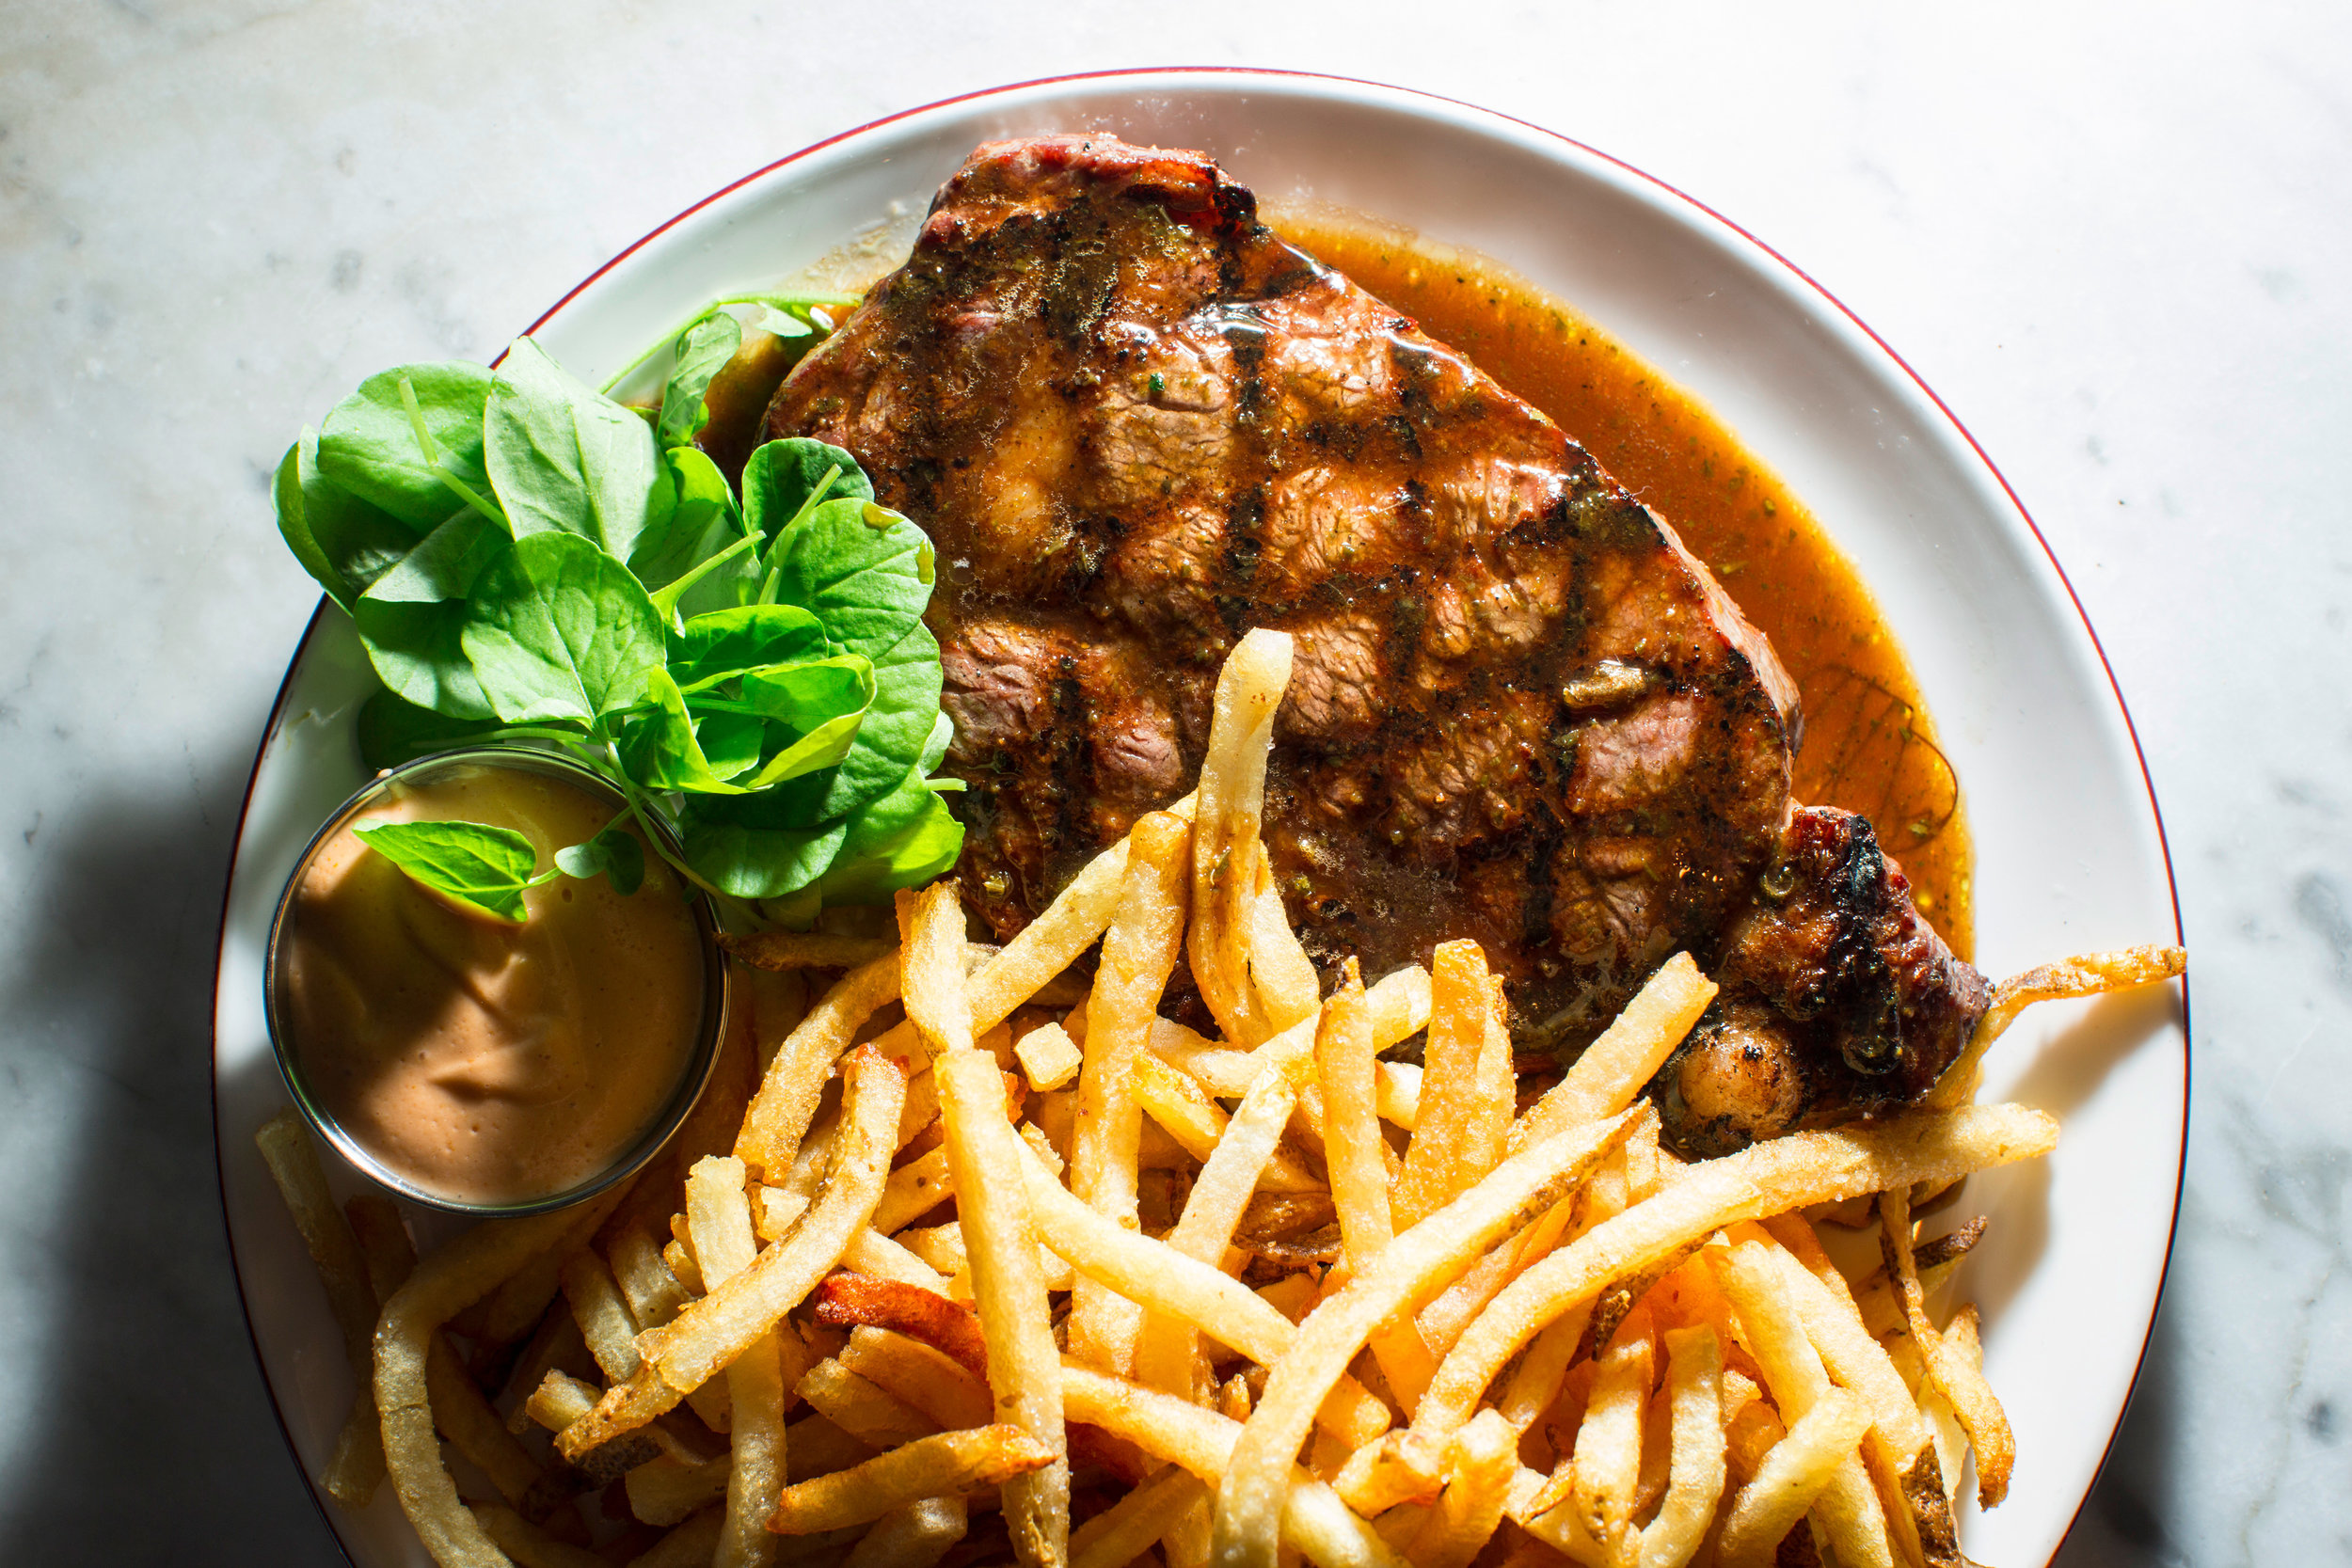  Plate of grilled steak with small ramekin of sauce, lettuce garnish and large pile of french fries 